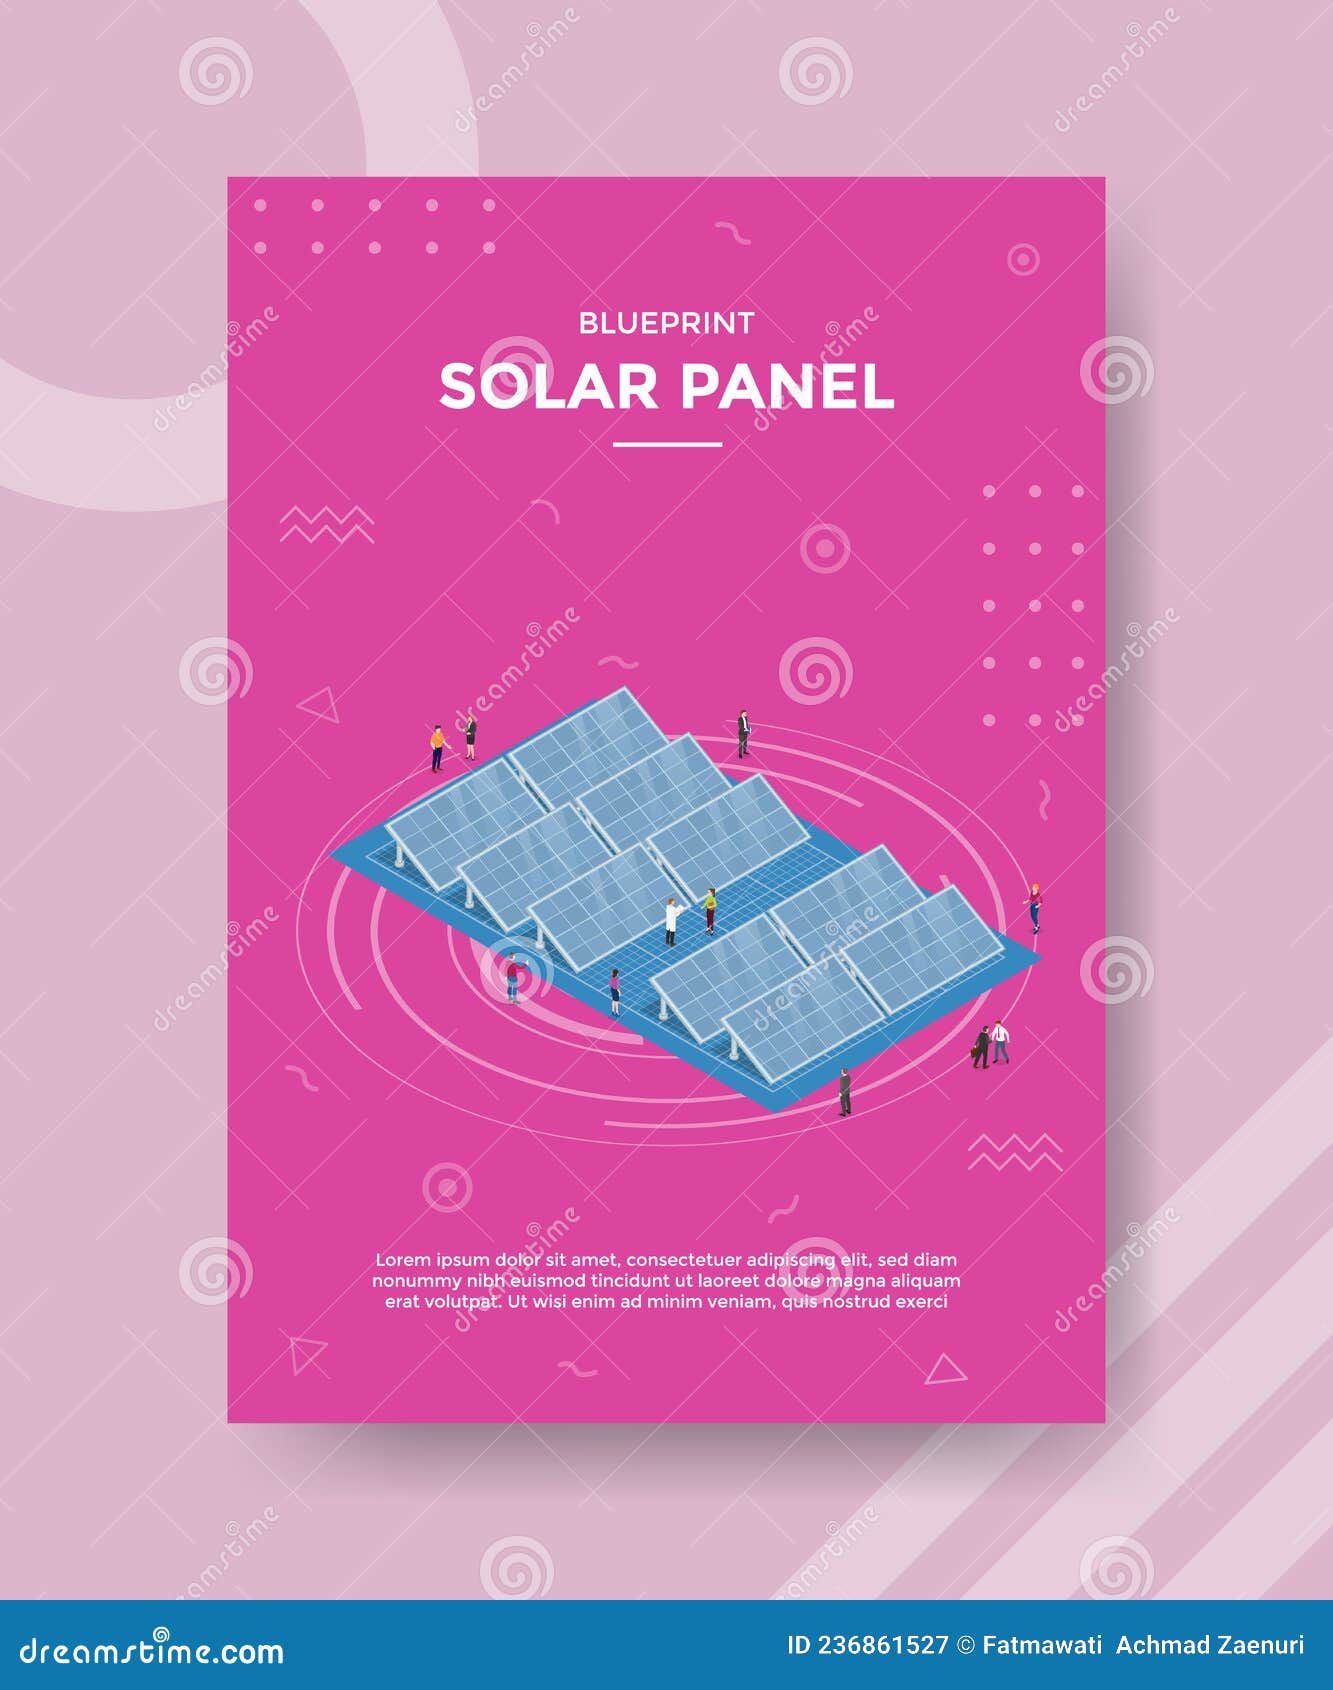 solarpanel energy blueprint concept for template banner and flyer with isometric style